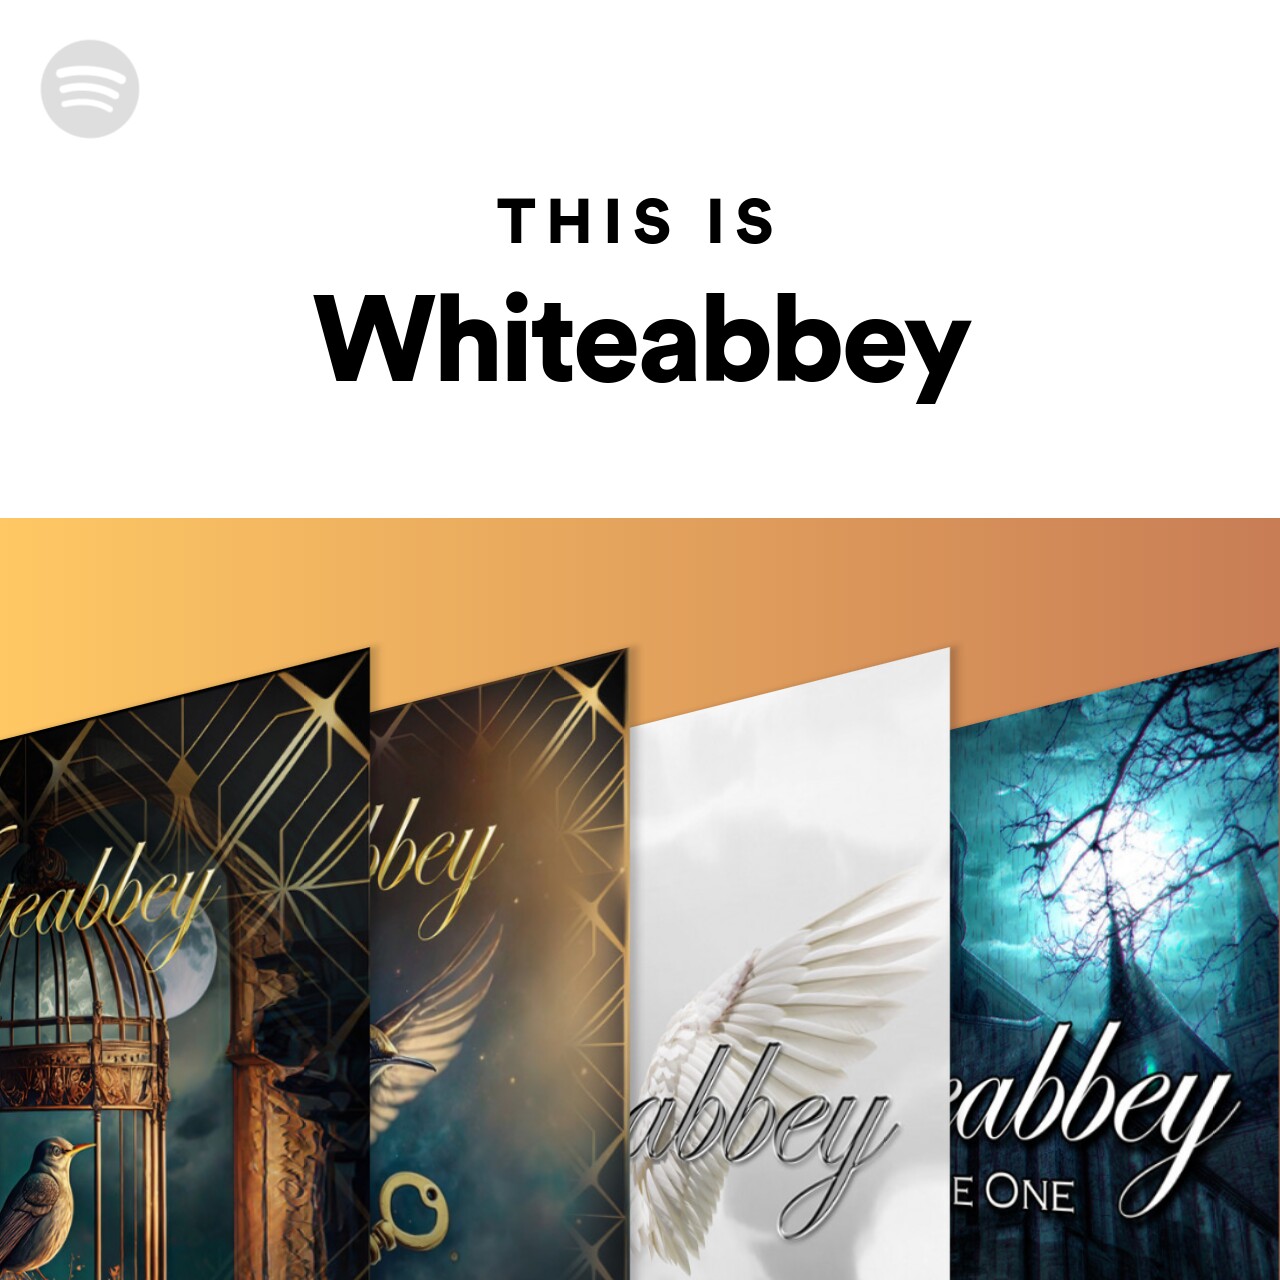 This Is Whiteabbey